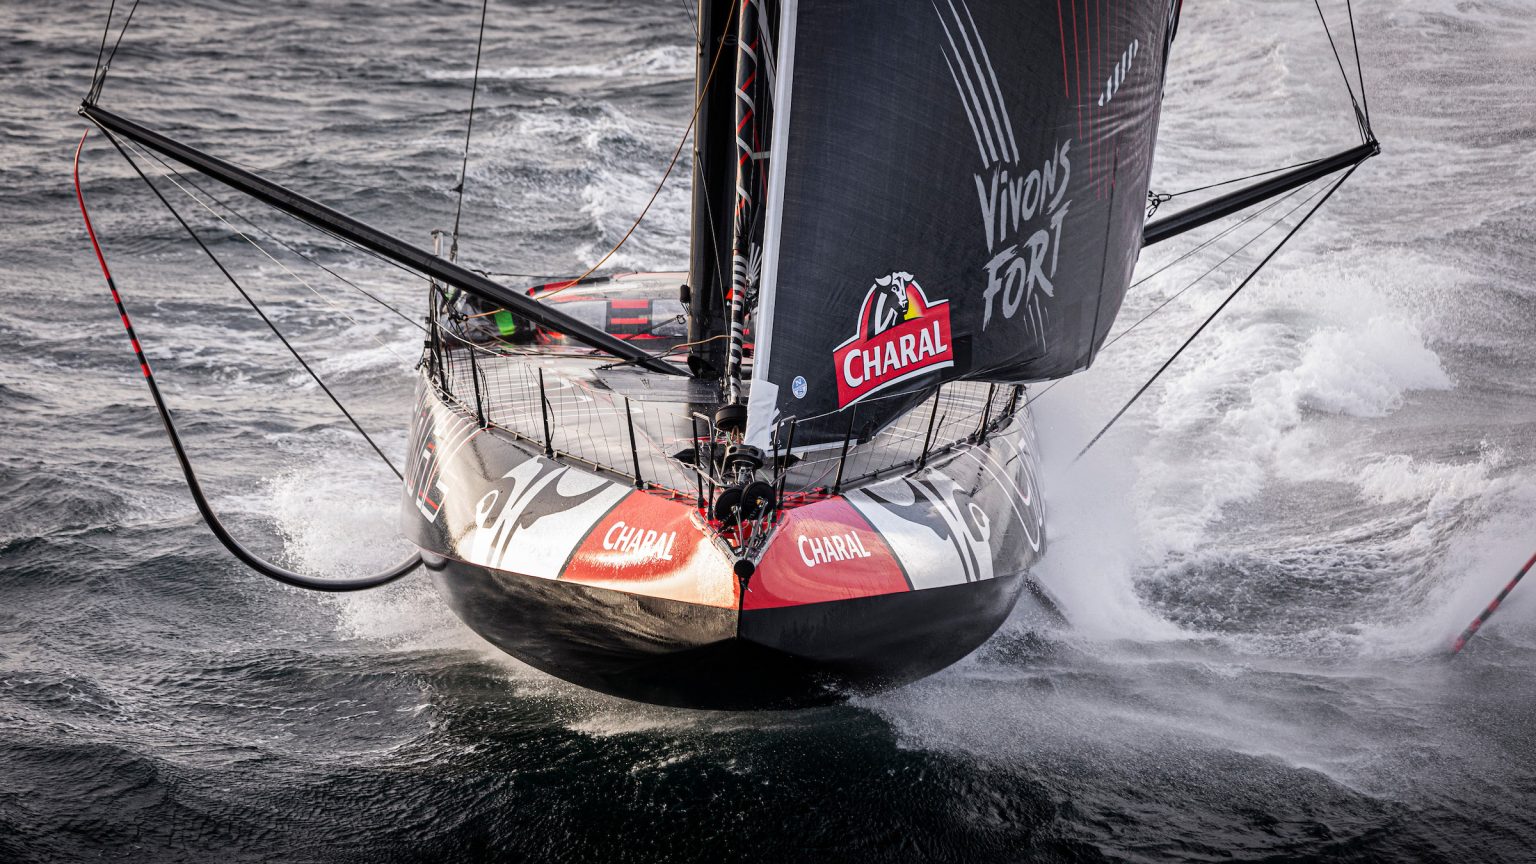 Caudrelier wins the 2022 Route du Rhum with new course record